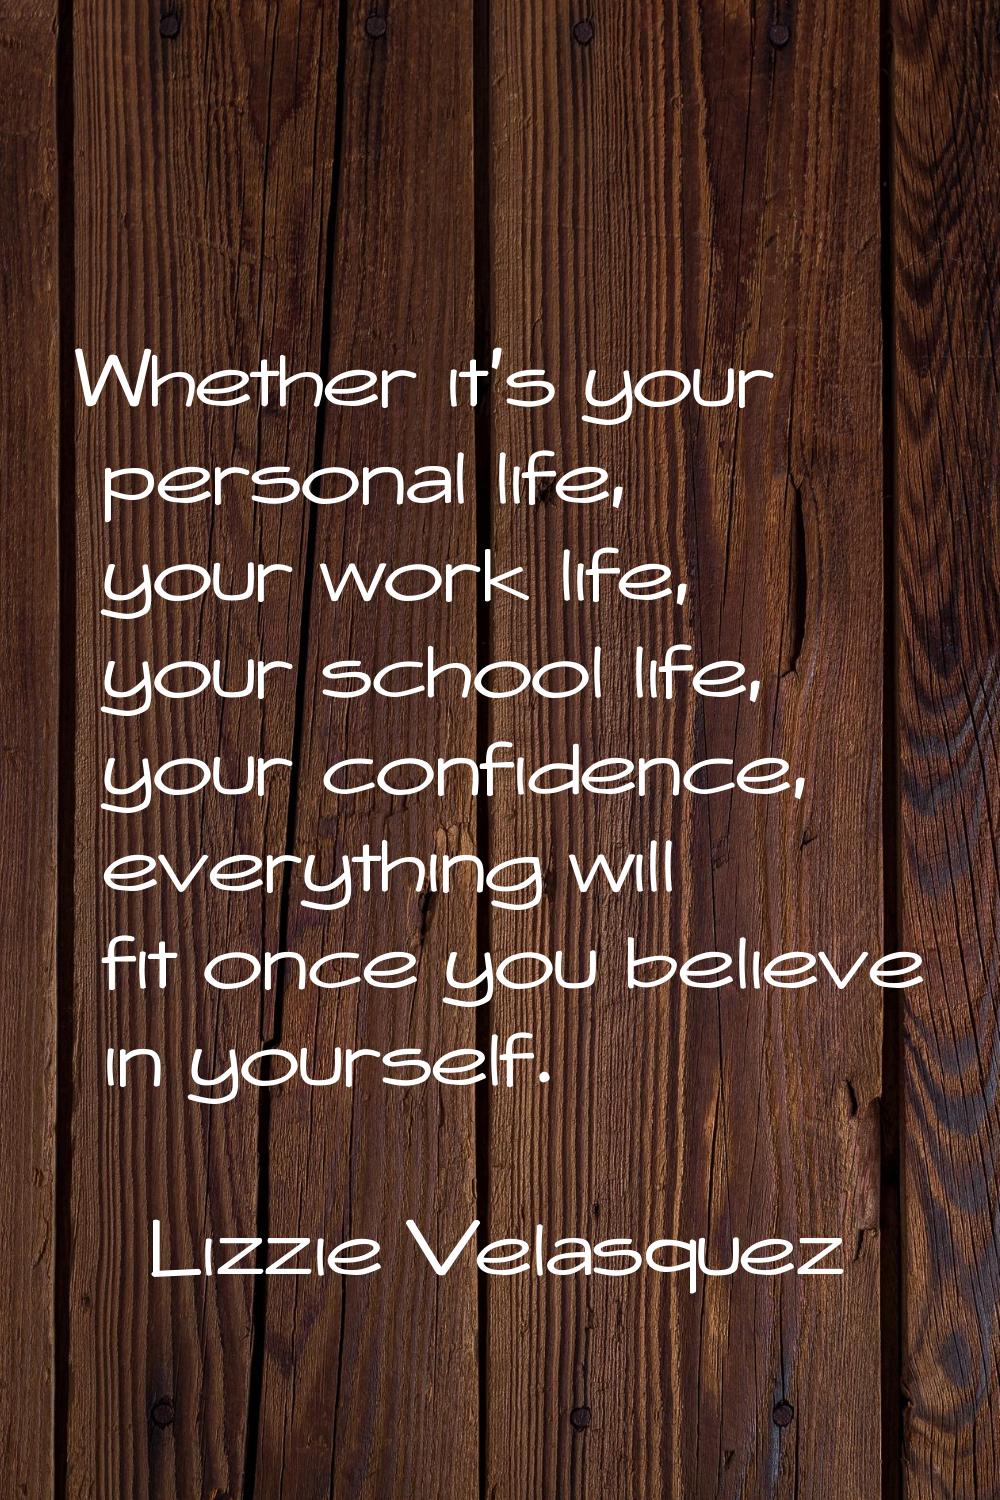 Whether it's your personal life, your work life, your school life, your confidence, everything will